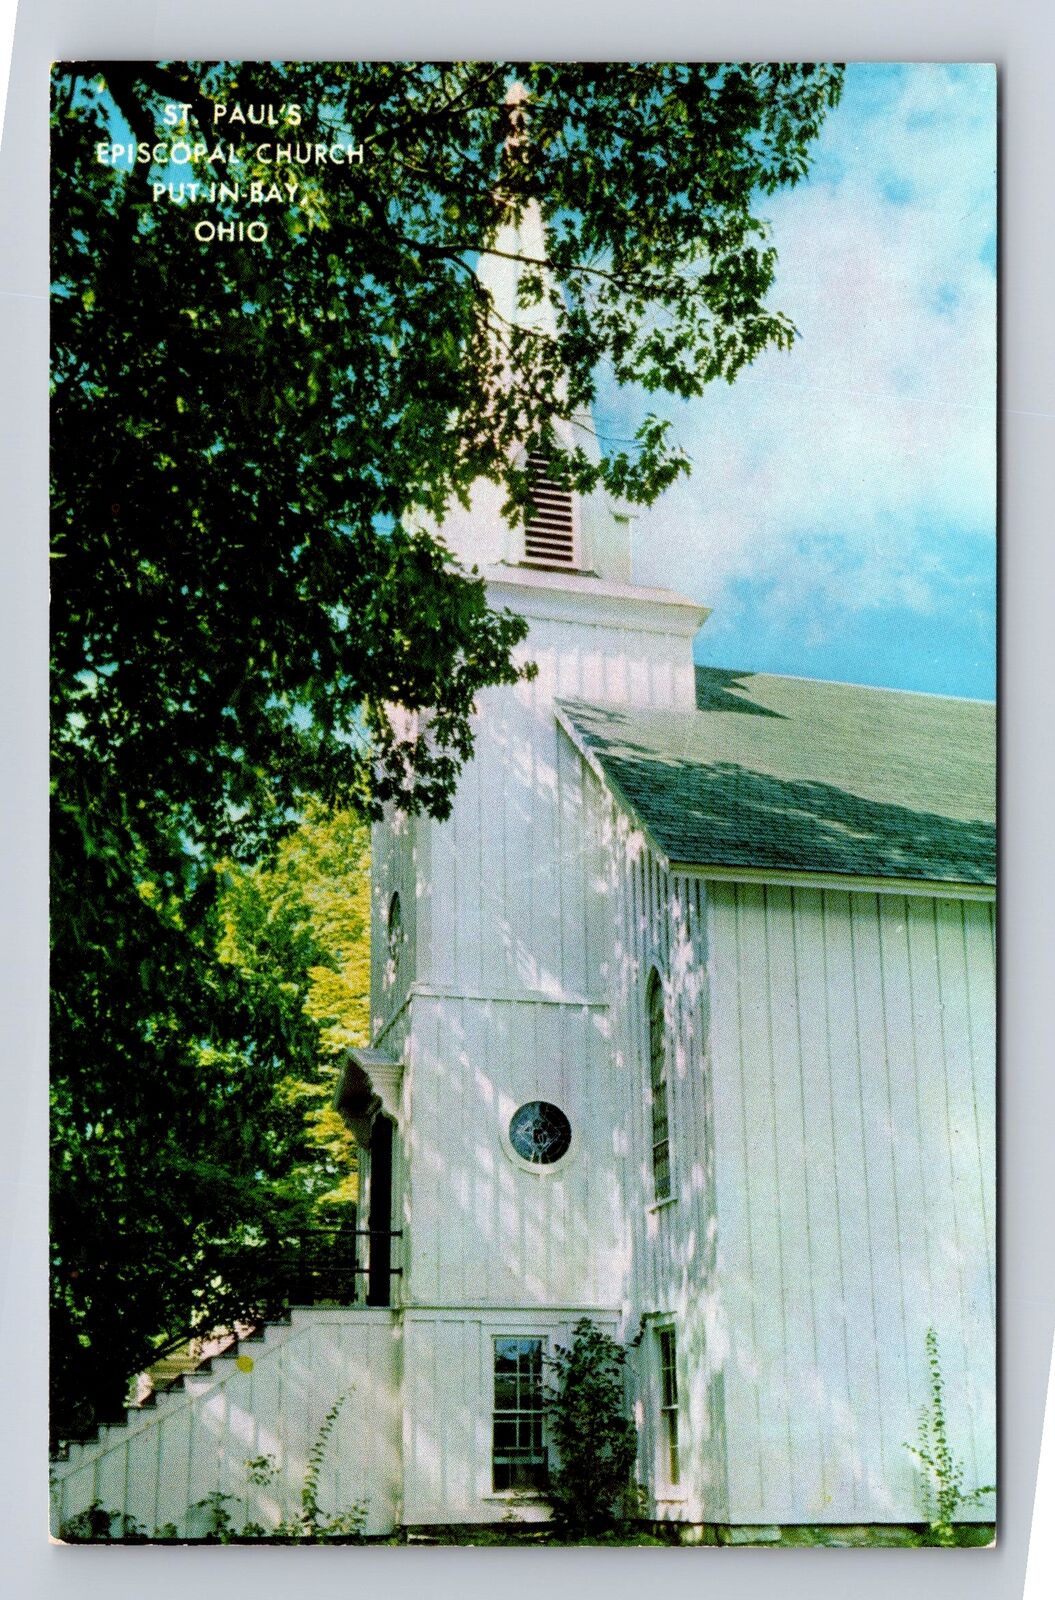 Put-In-Bay OH-Ohio, St. Paul's Episcopal Church, Antique Vintage Postcard